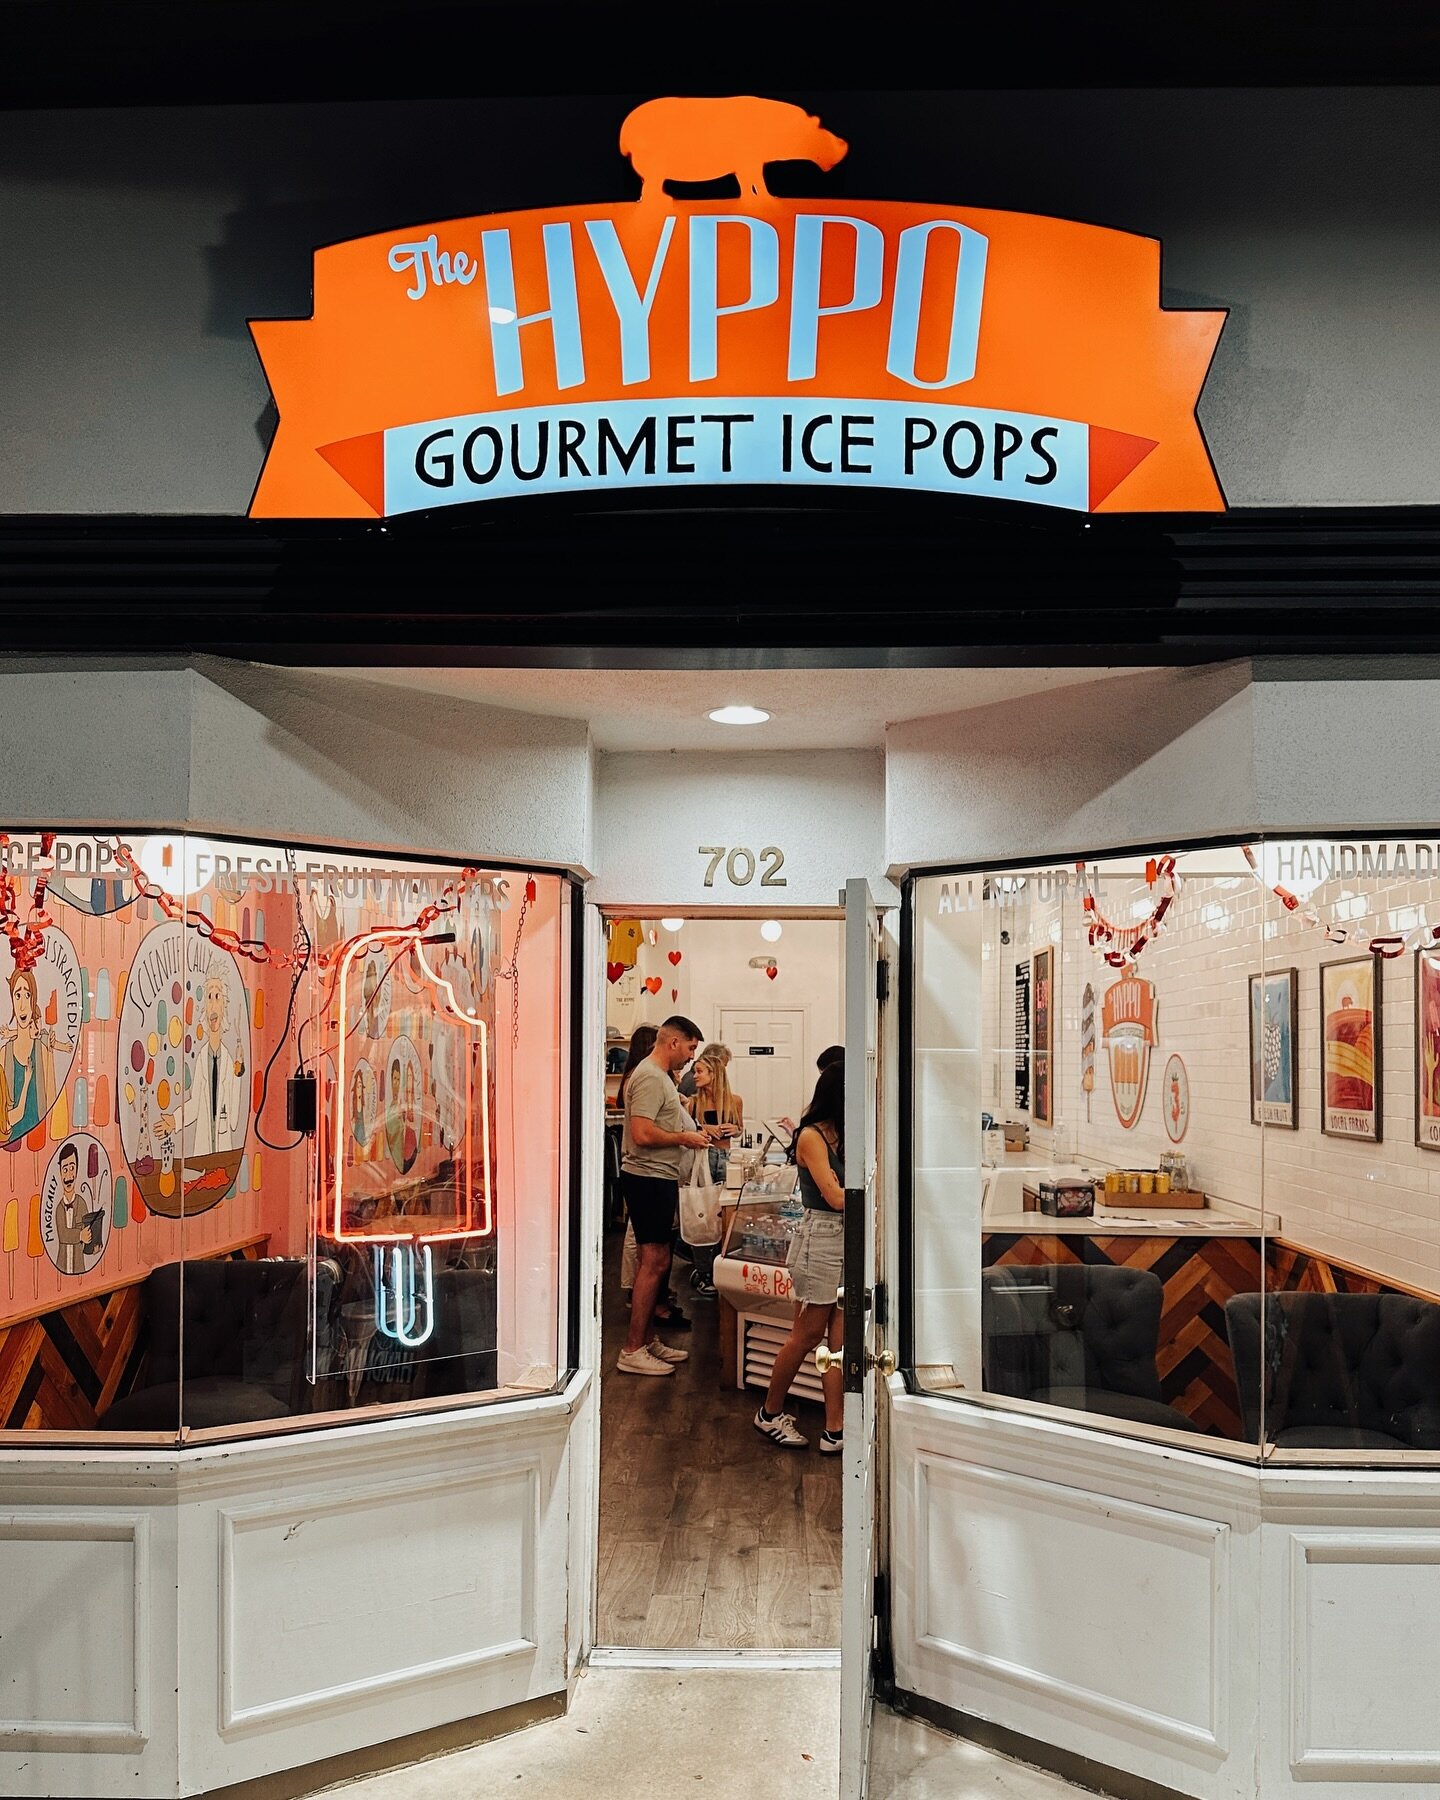 POP Culture — The Hyppo Gourmet Ice Pops